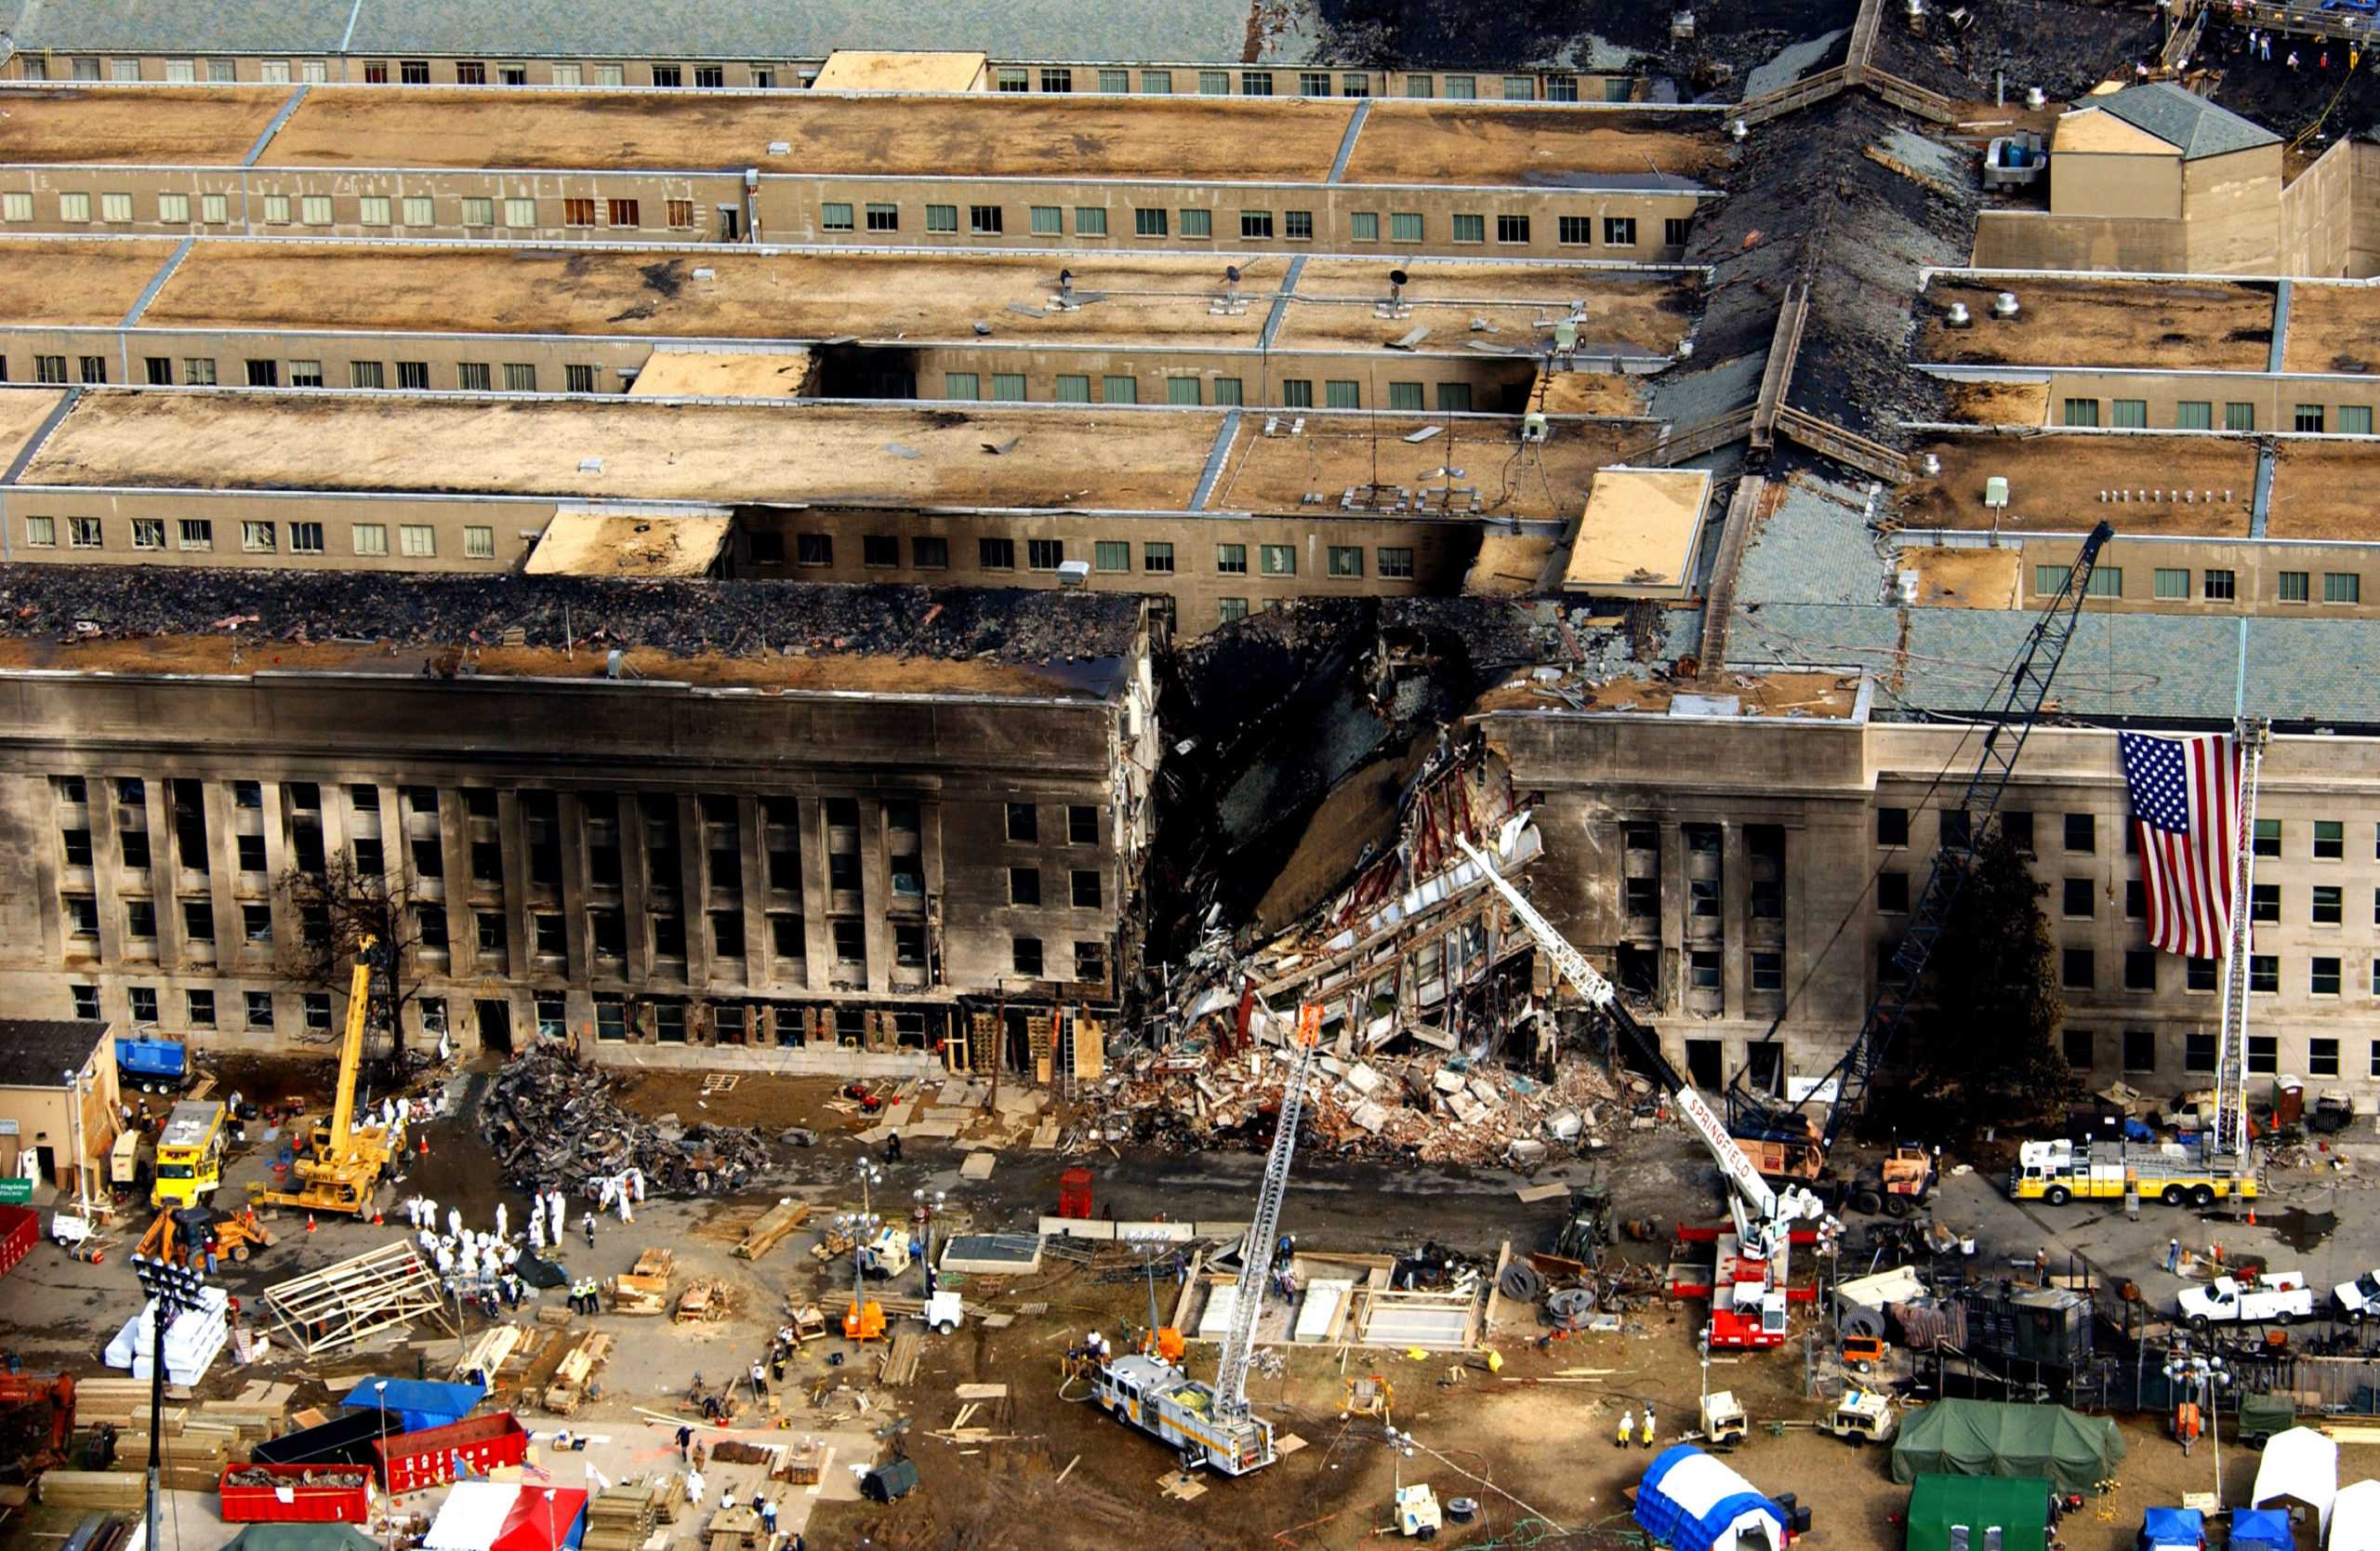 0 1 0 9 1 4 - F - 8 0 0 6 R - 0 0 2 FBI agents, fire fighters, rescue workers and engineers work at the Pentagon crash site on Sept. 14, 2001, where a high-jacked American Airlines flight slammed into the building on Sept. 11. The terrorist attack caused extensive damage to the west face of the building and followed similar attacks on the twin towers of the World Trade Center in New York City. DoD photo by Tech. Sgt. Cedric H. Rudisill. (Released)